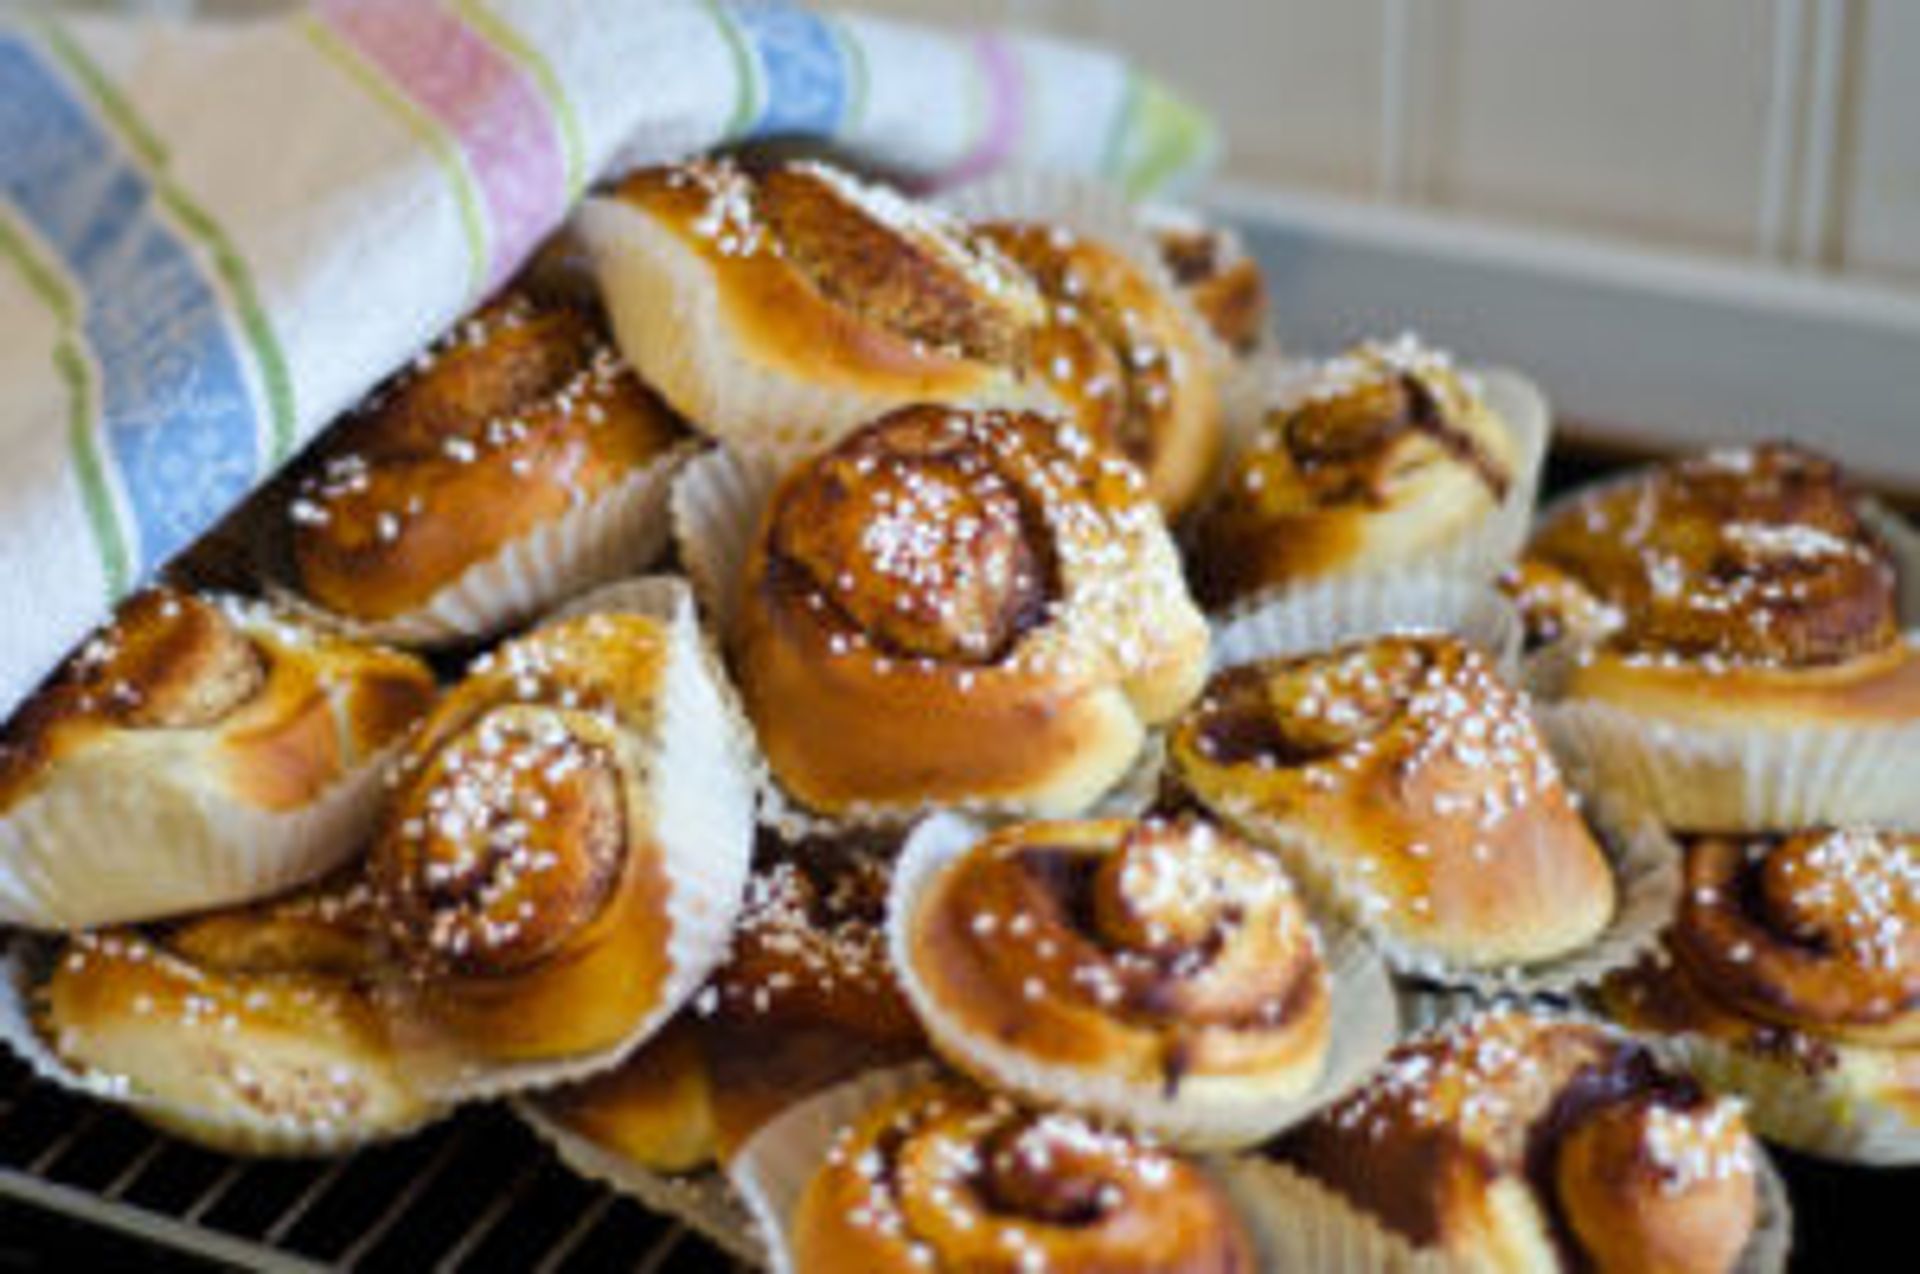 A tray filled with cinnamon buns.